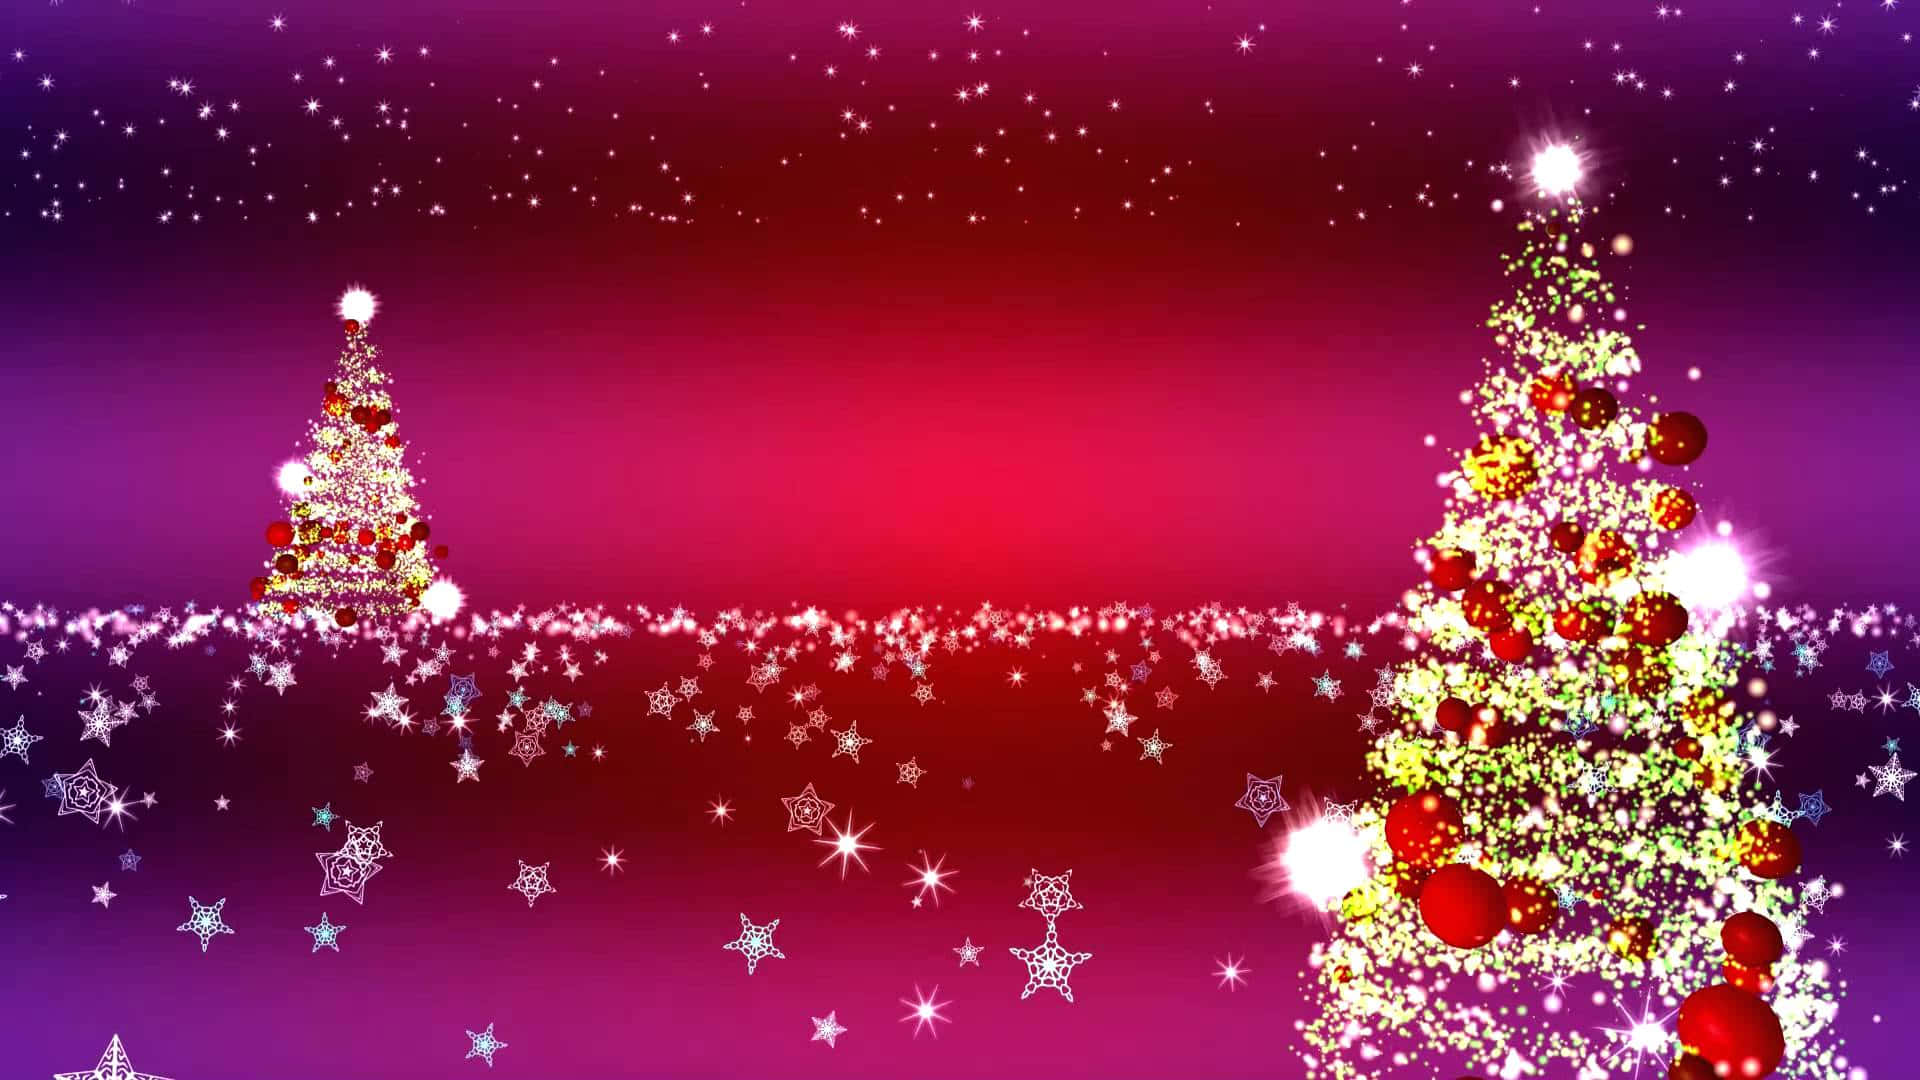 Celebrate the Holidays with a Fun and Festive High Resolution Christmas Background